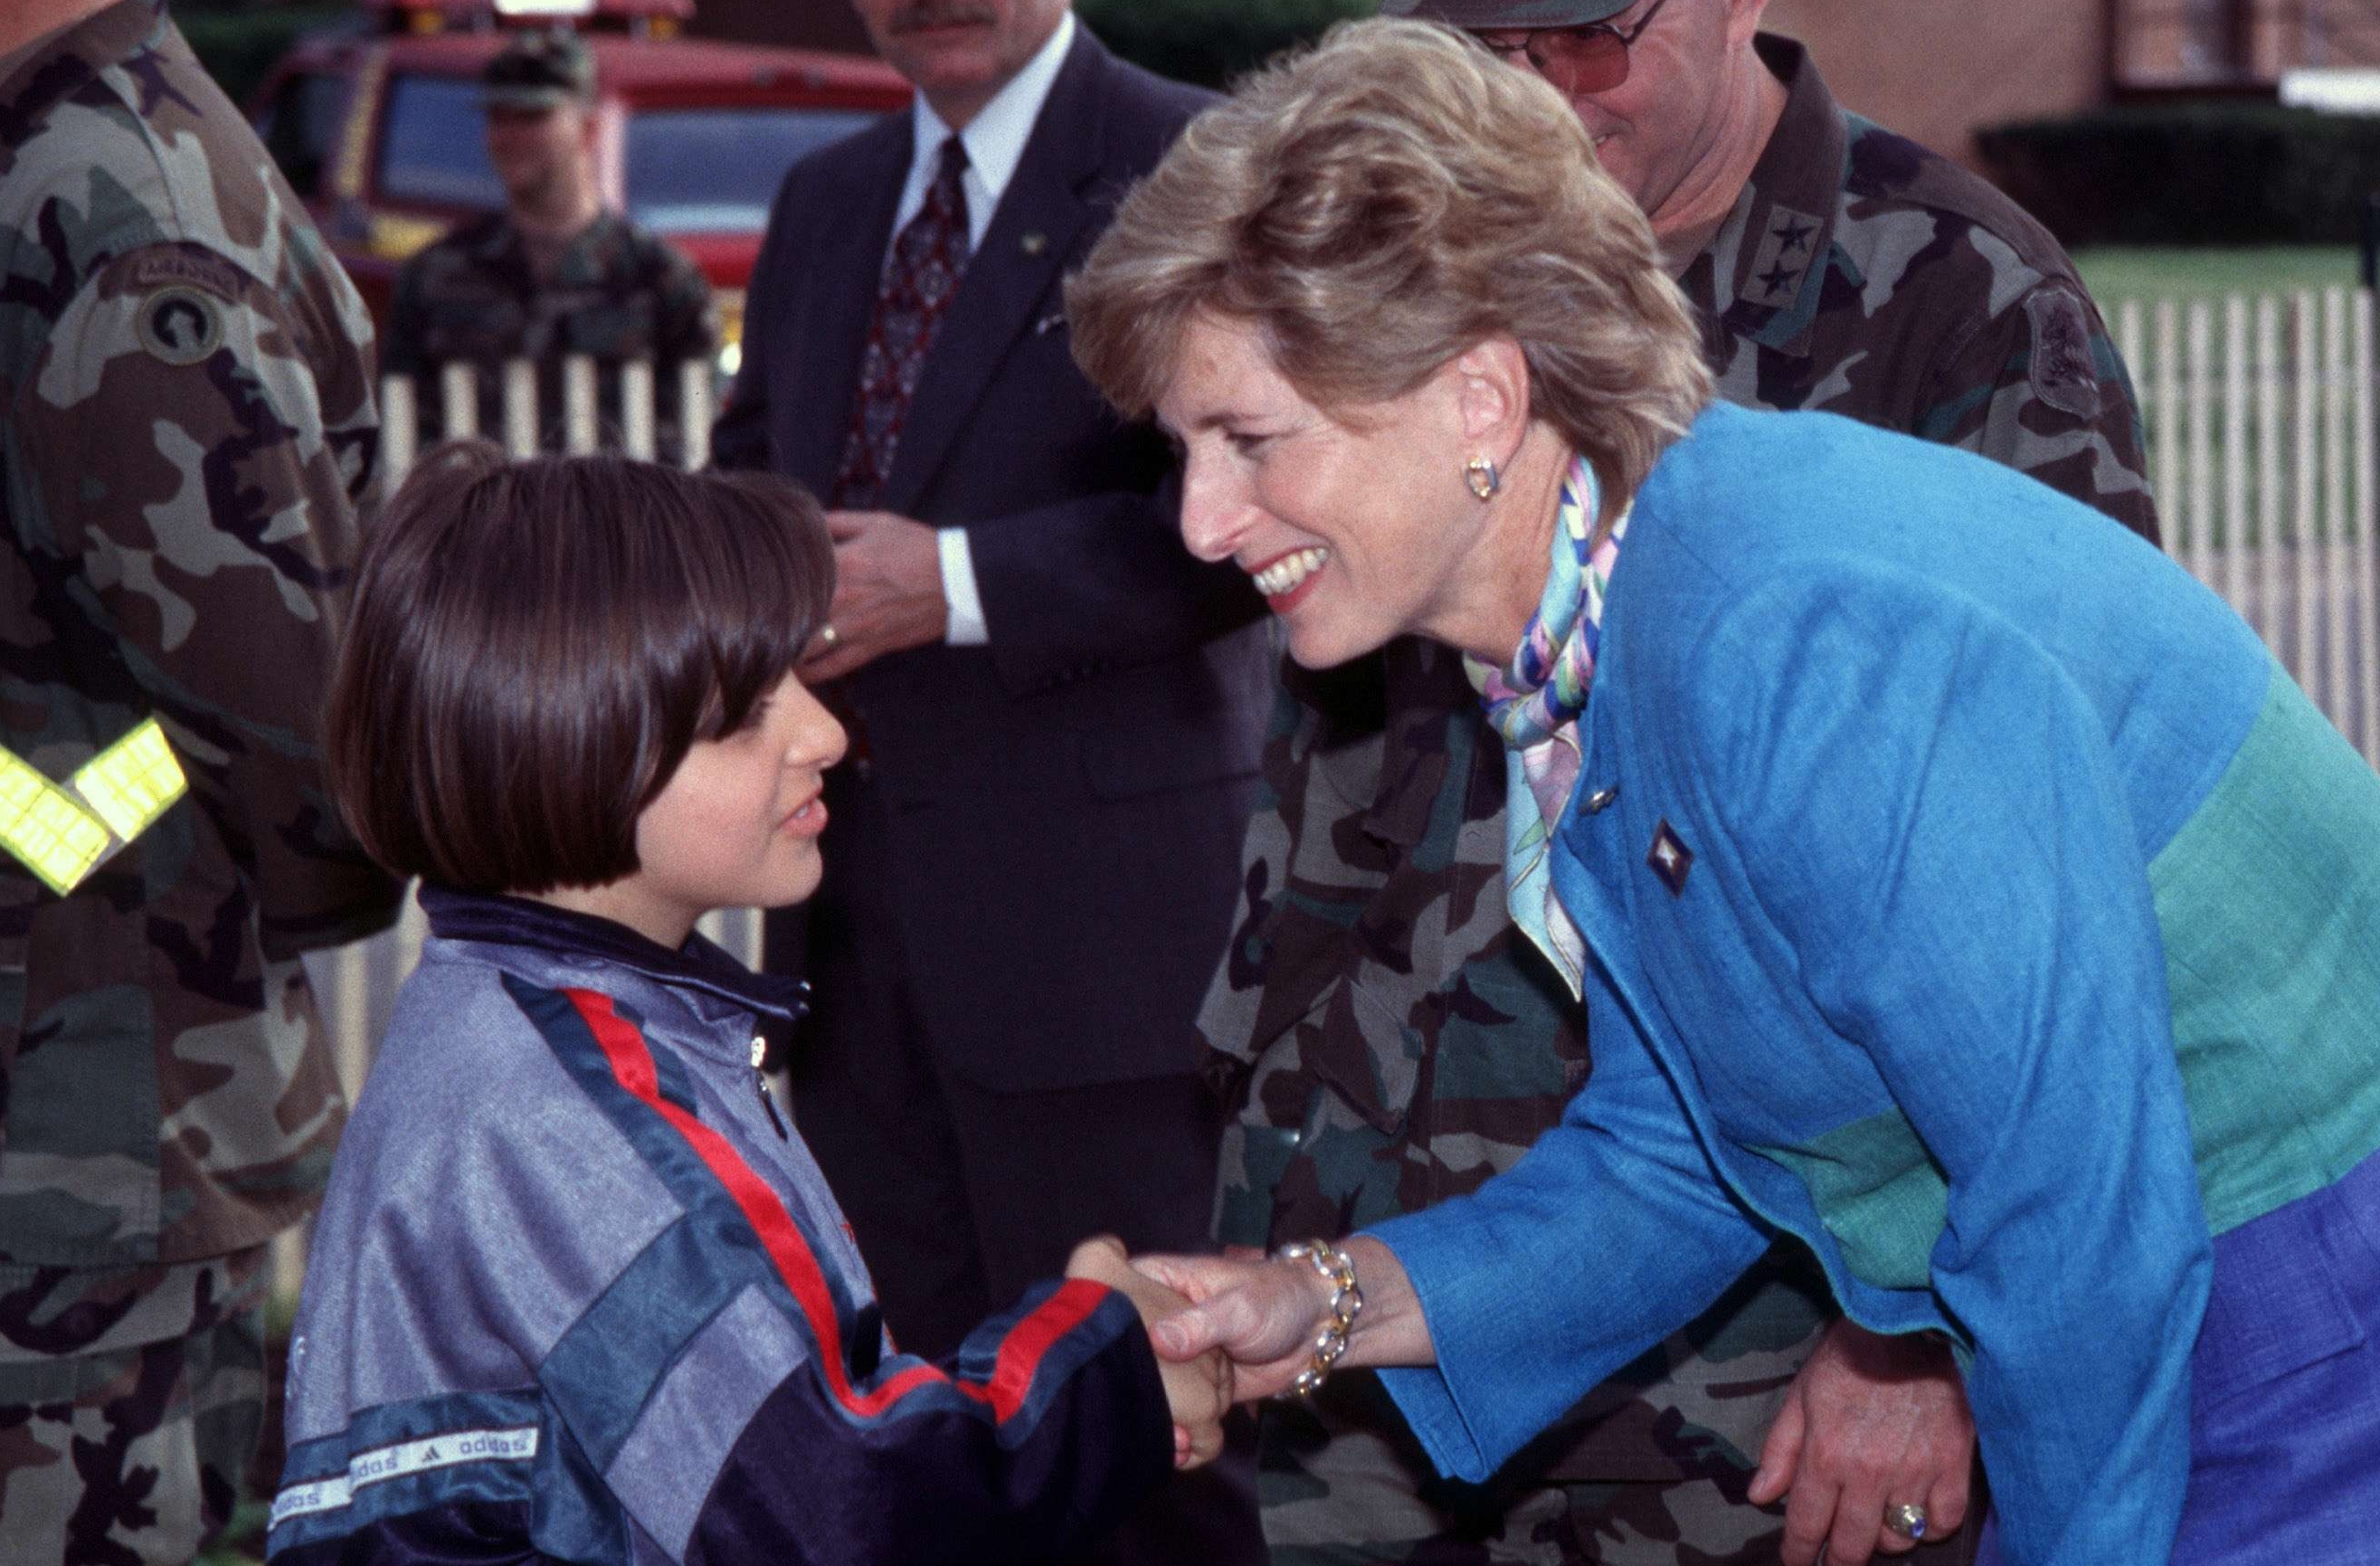 Christie Todd Whitman Chats with a Young Kosovar Refugee